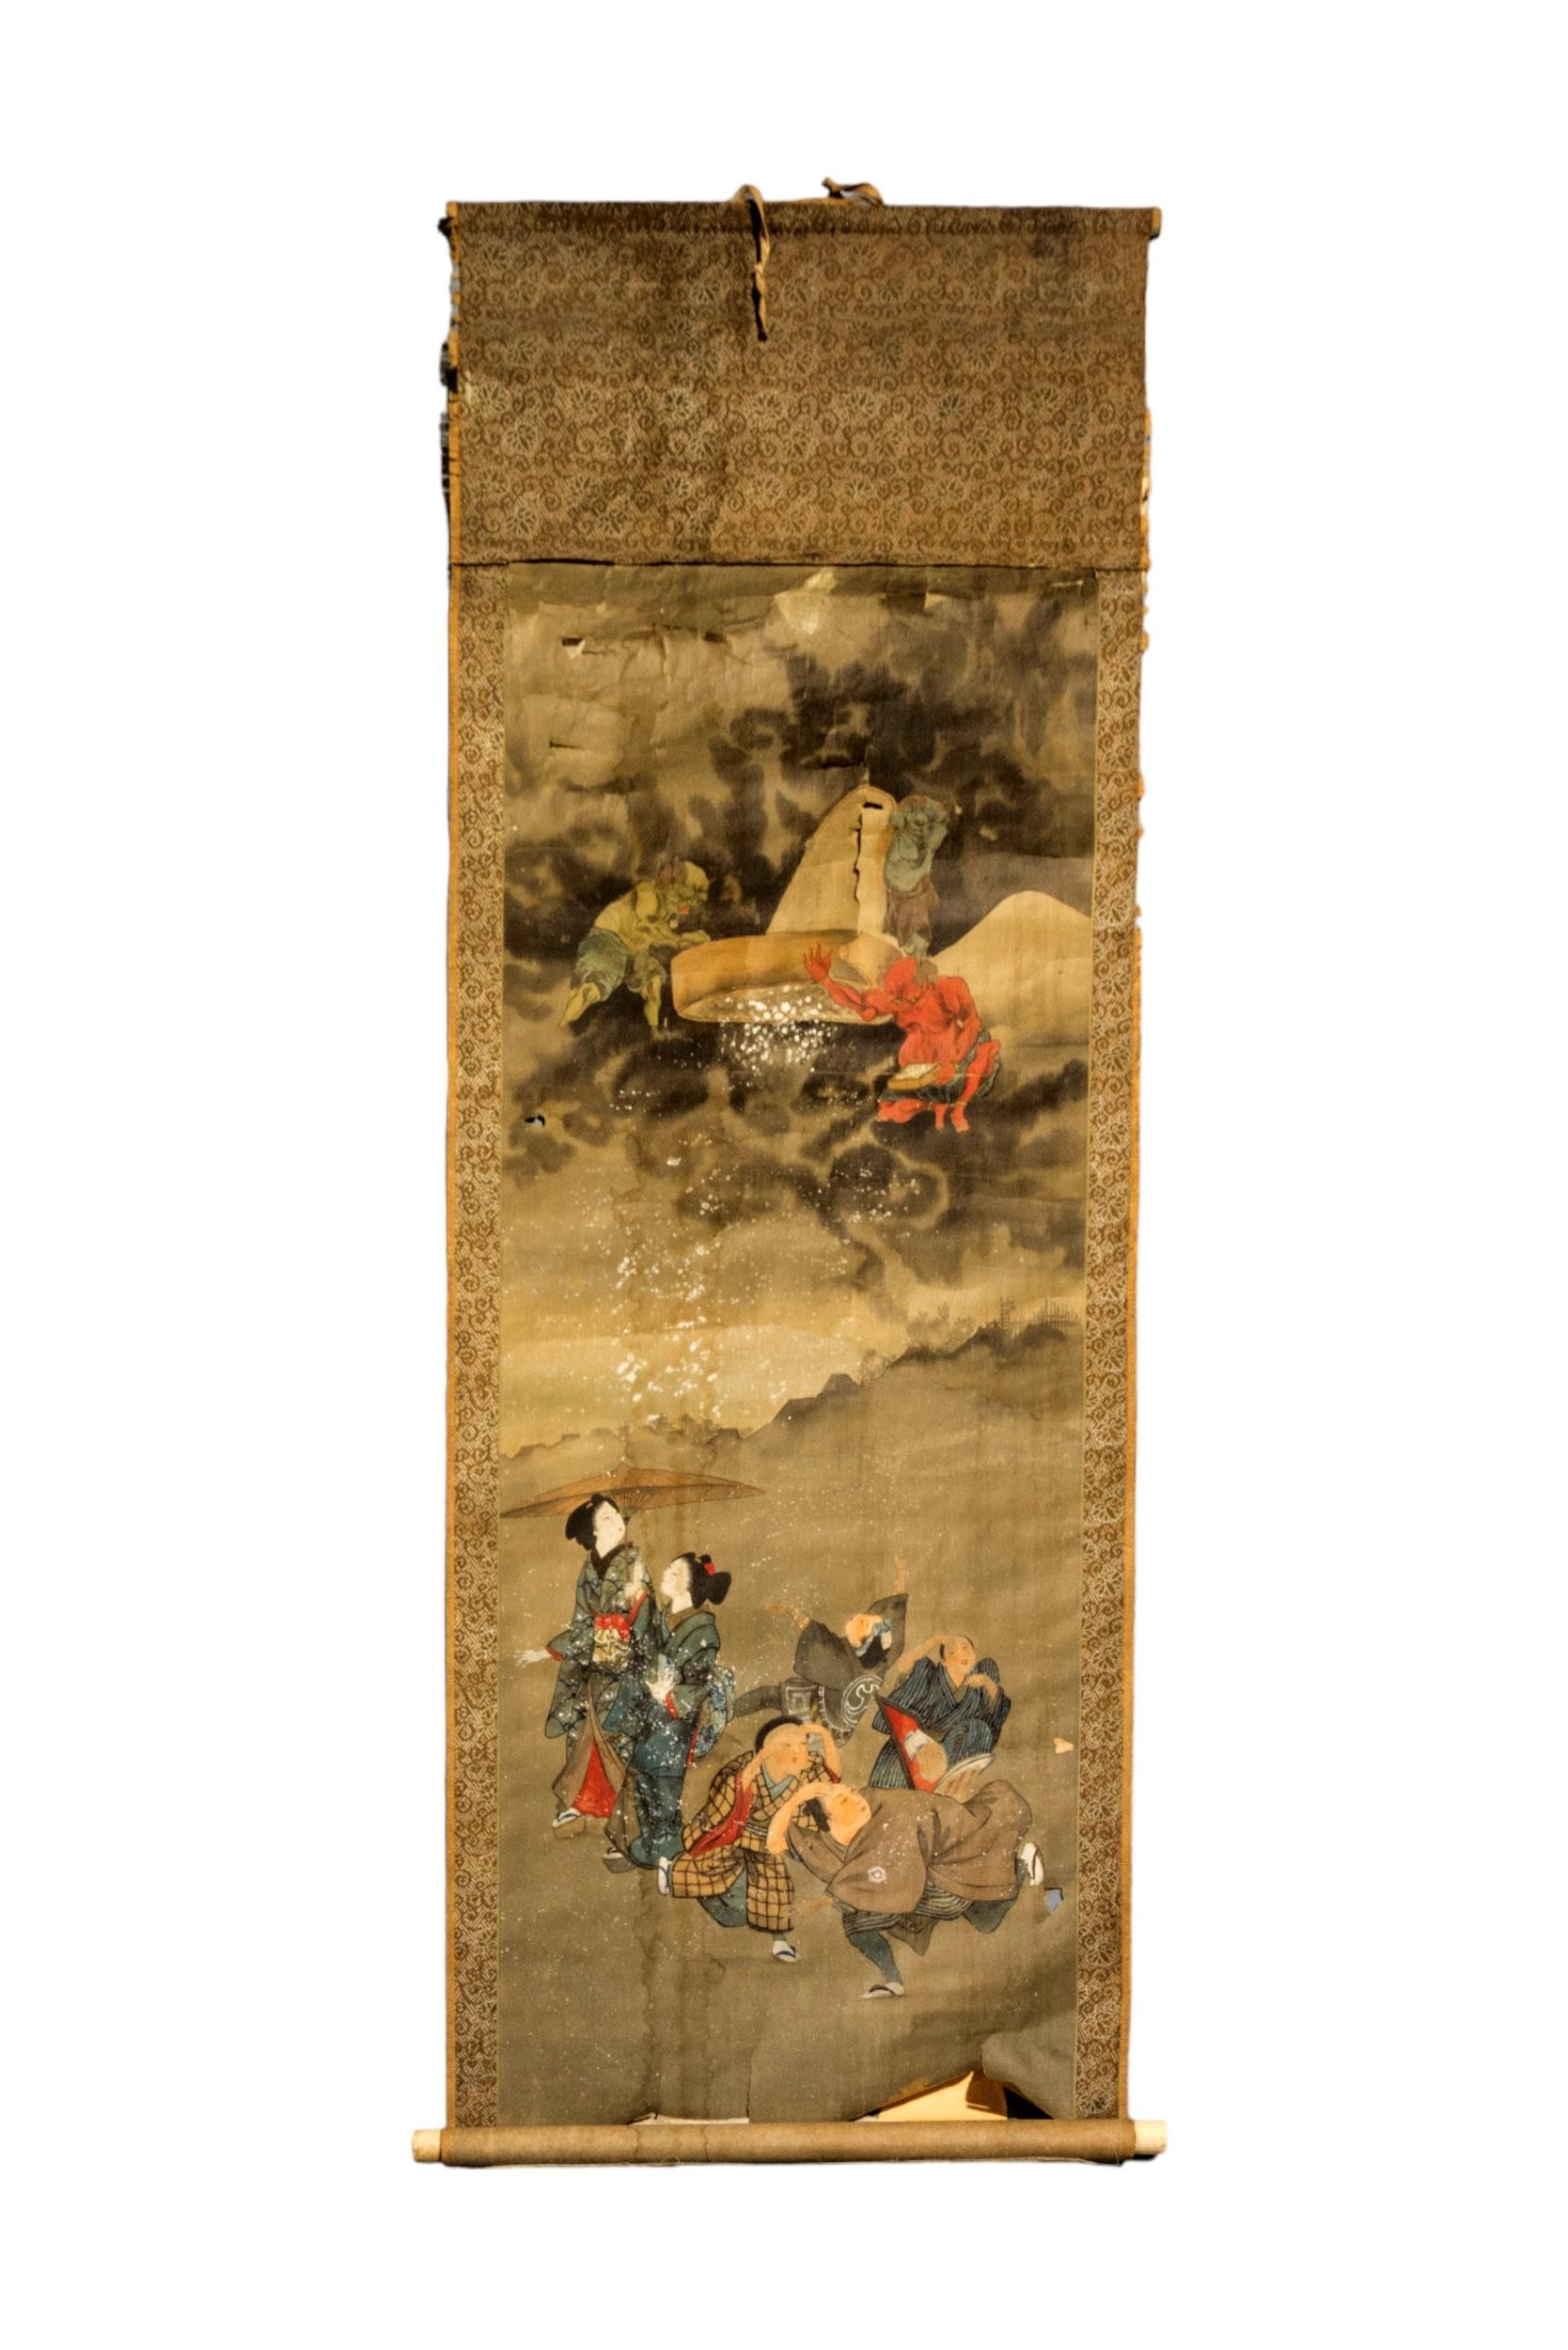 A THAI/BURMESE SCROLL DEPICTING DANCING WOMEN IN A LANDSCAPE, a Japanese scroll depicting devils - Image 4 of 5